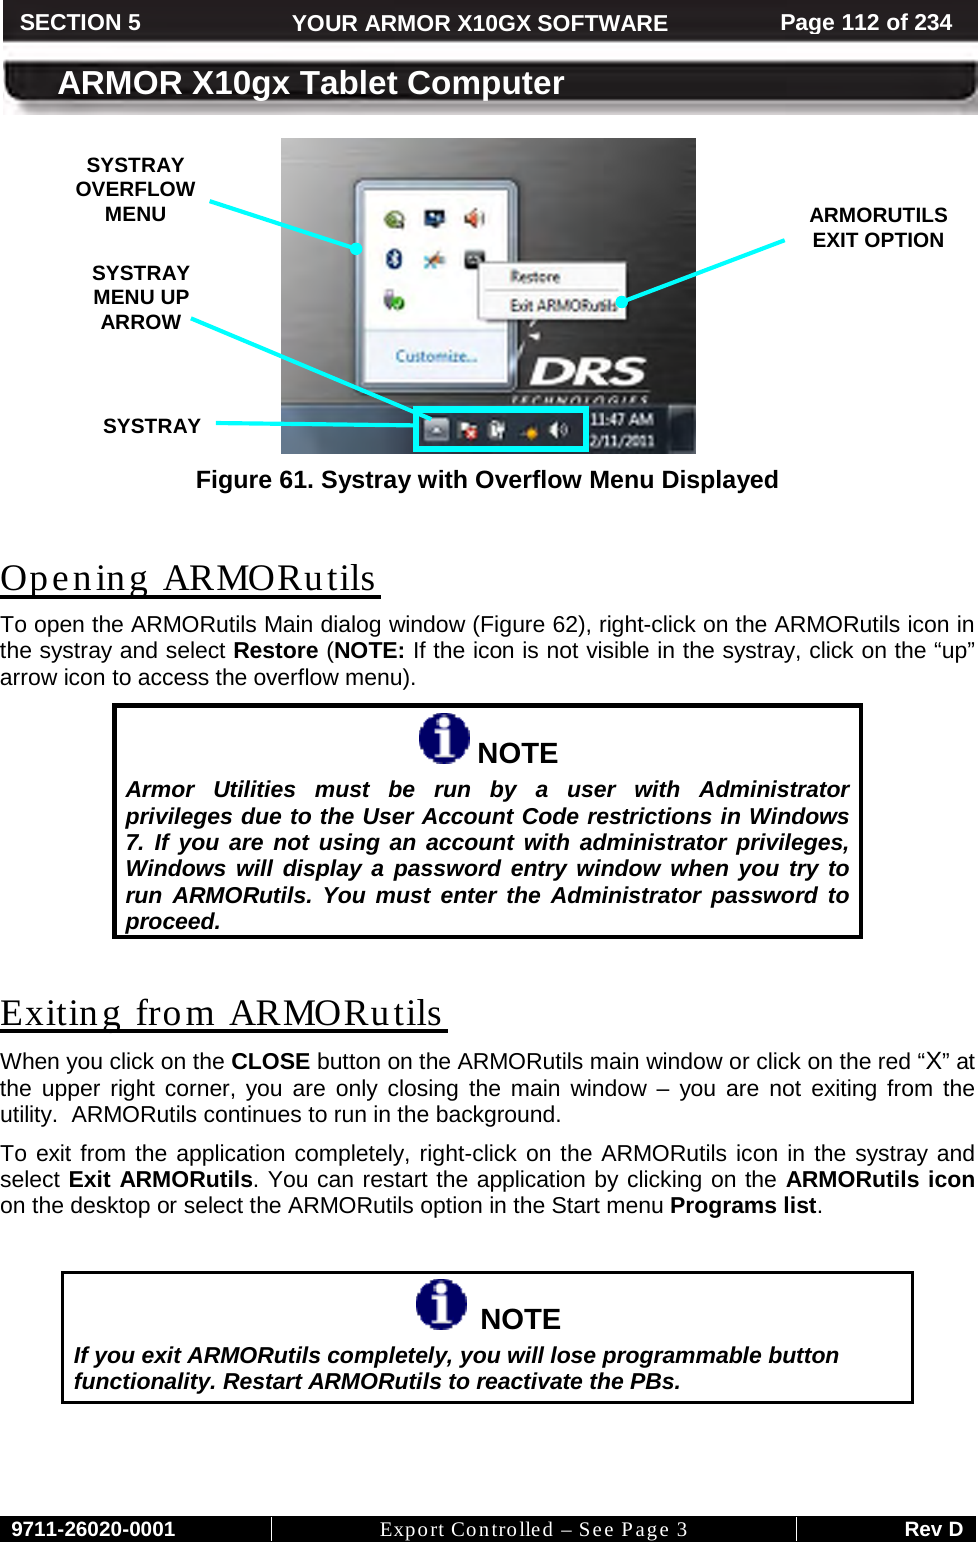     9711-26020-0001 Export Controlled – See Page 3 Rev D SECTION 5 YOUR ARMOR X10GX SOFTWARE Page 112 of 234  ARMOR X10gx Tablet Computer  Figure 61. Systray with Overflow Menu Displayed  Opening ARMORutils To open the ARMORutils Main dialog window (Figure 62), right-click on the ARMORutils icon in the systray and select Restore (NOTE: If the icon is not visible in the systray, click on the “up” arrow icon to access the overflow menu).  NOTE Armor Utilities must be run by a user with Administrator privileges due to the User Account Code restrictions in Windows 7. If you are not using an account with administrator privileges, Windows will display a password entry window when you try to run ARMORutils. You must enter the Administrator password to proceed.  Exiting from ARMORutils  When you click on the CLOSE button on the ARMORutils main window or click on the red “X” at the upper right corner, you are only closing the main window –  you are not exiting from the utility.  ARMORutils continues to run in the background. To exit from the application completely, right-click on the ARMORutils icon in the systray and select Exit ARMORutils. You can restart the application by clicking on the ARMORutils icon on the desktop or select the ARMORutils option in the Start menu Programs list.    NOTE If you exit ARMORutils completely, you will lose programmable button functionality. Restart ARMORutils to reactivate the PBs.   SYSTRAY OVERFLOW MENU  SYSTRAY  ARMORUTILS EXIT OPTION  SYSTRAY MENU UP ARROW  